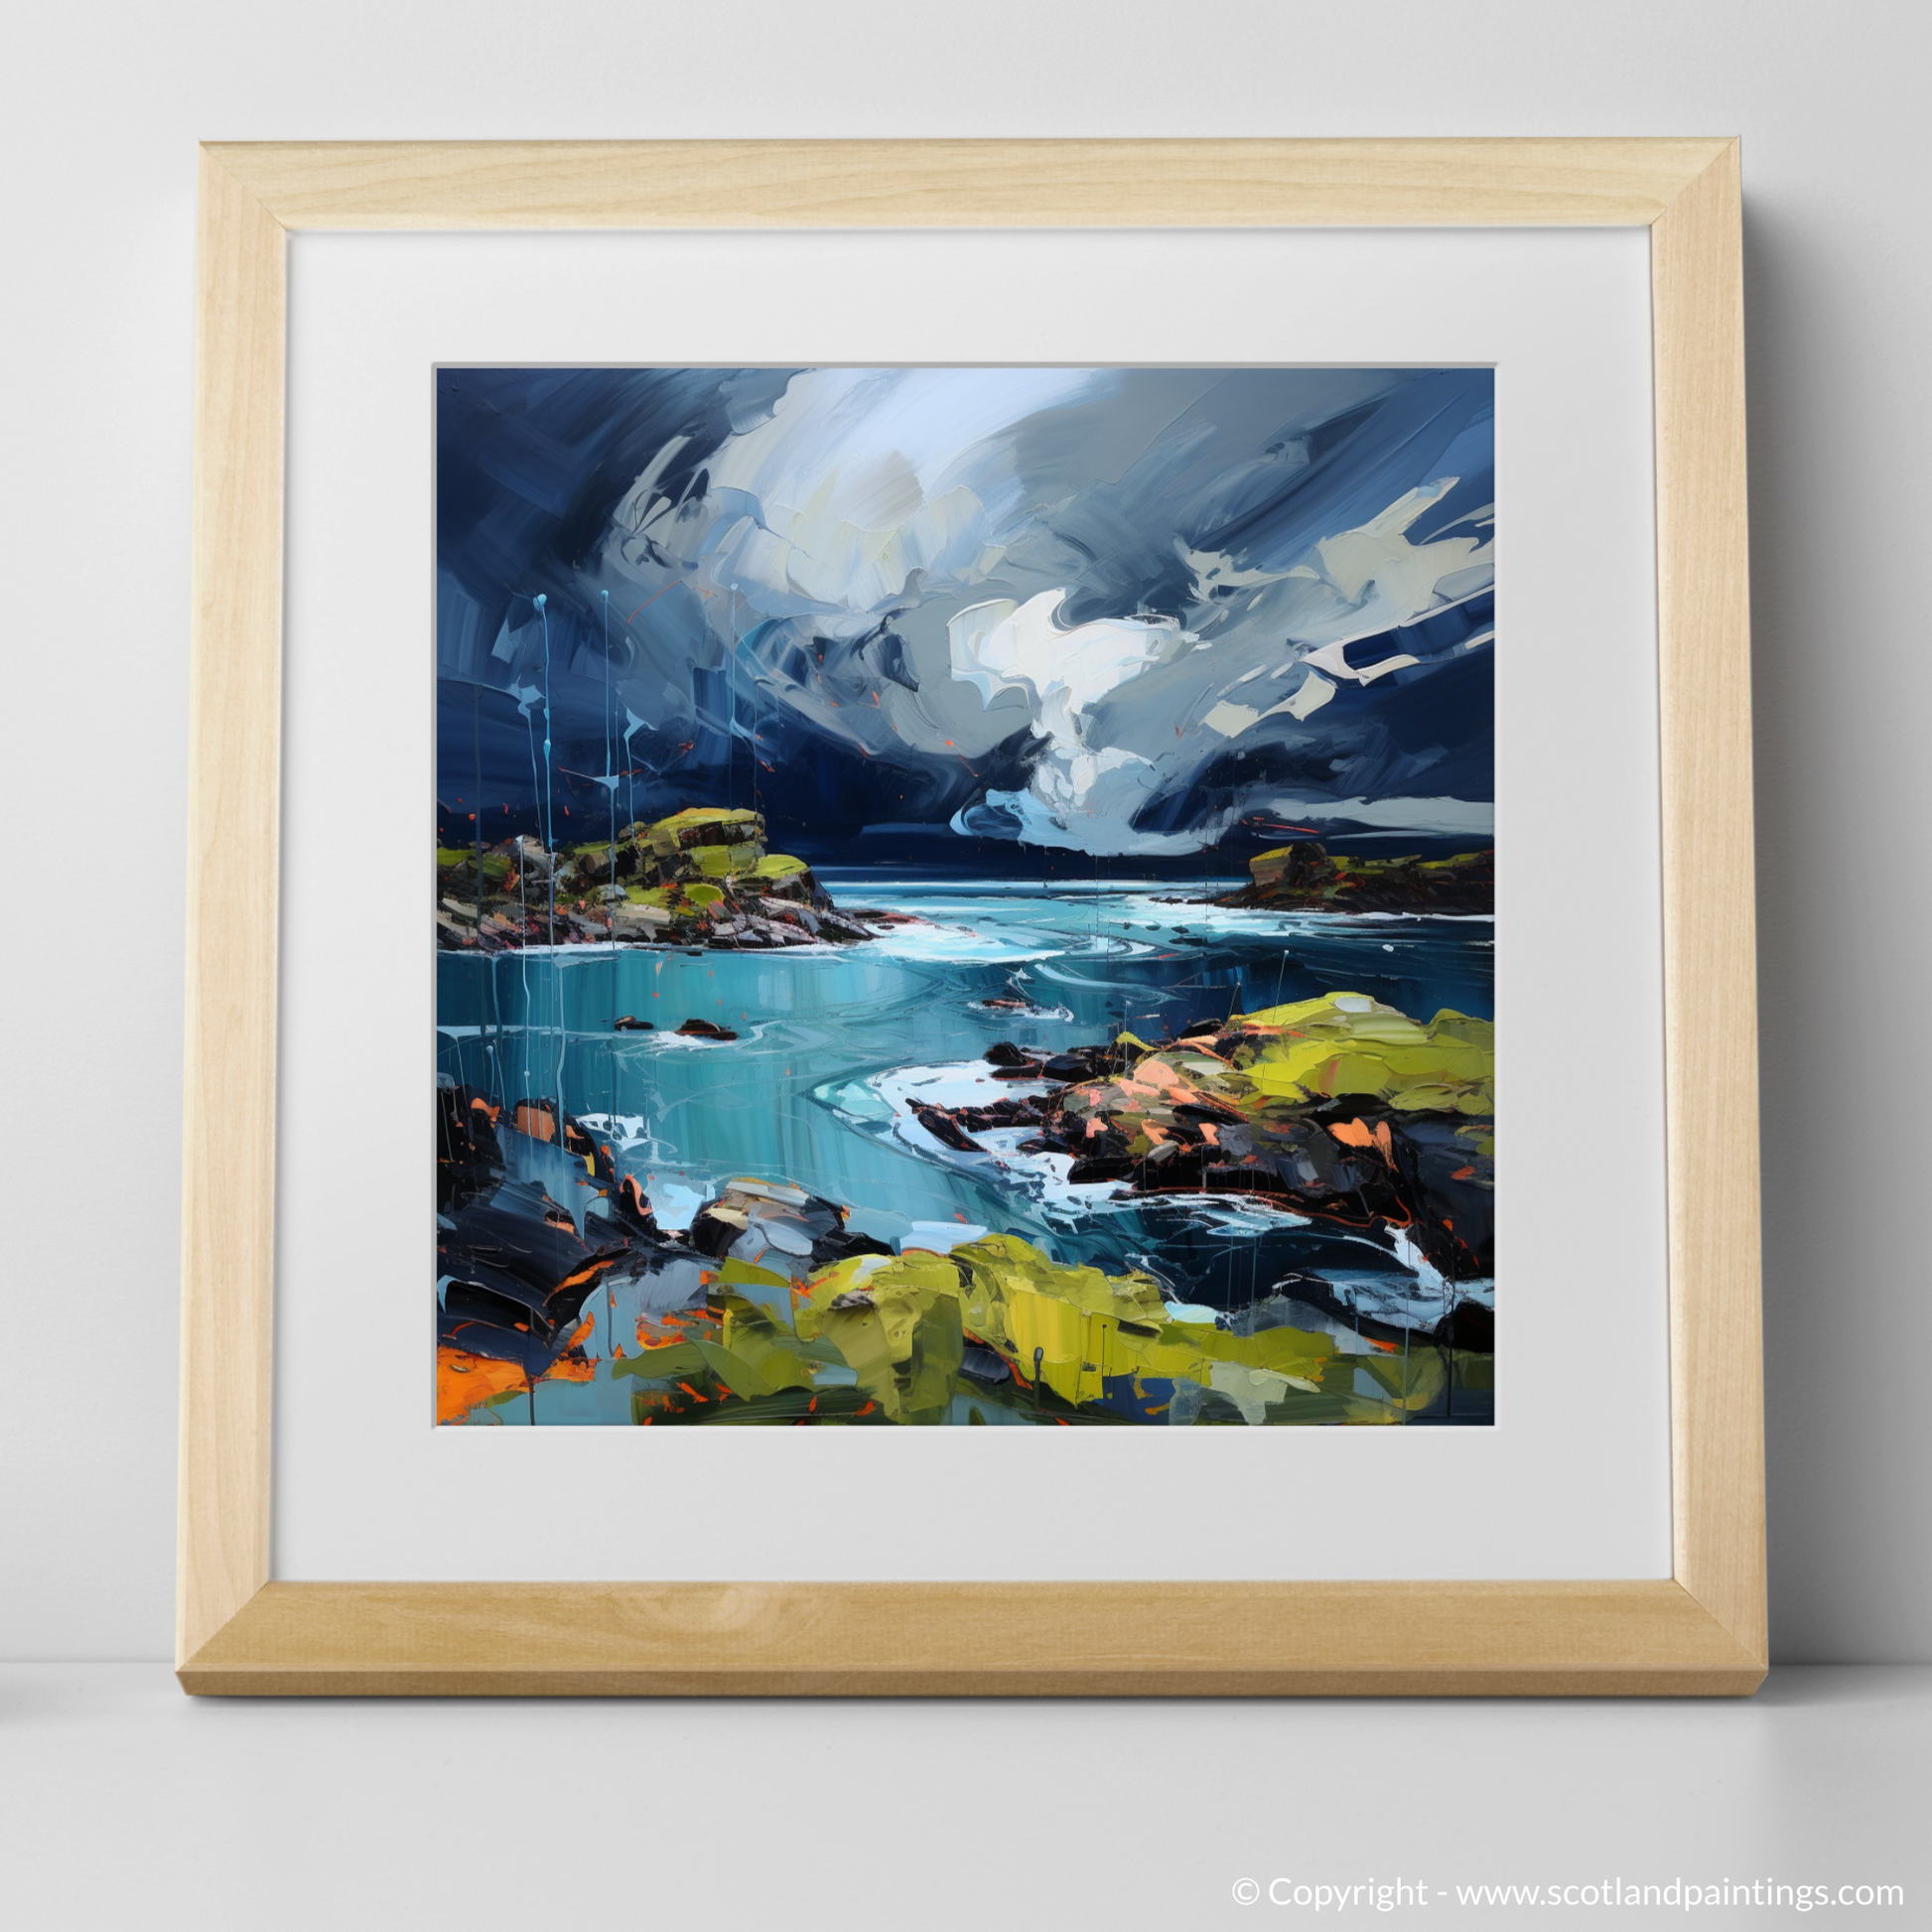 Art Print of Ardalanish Bay with a stormy sky with a natural frame